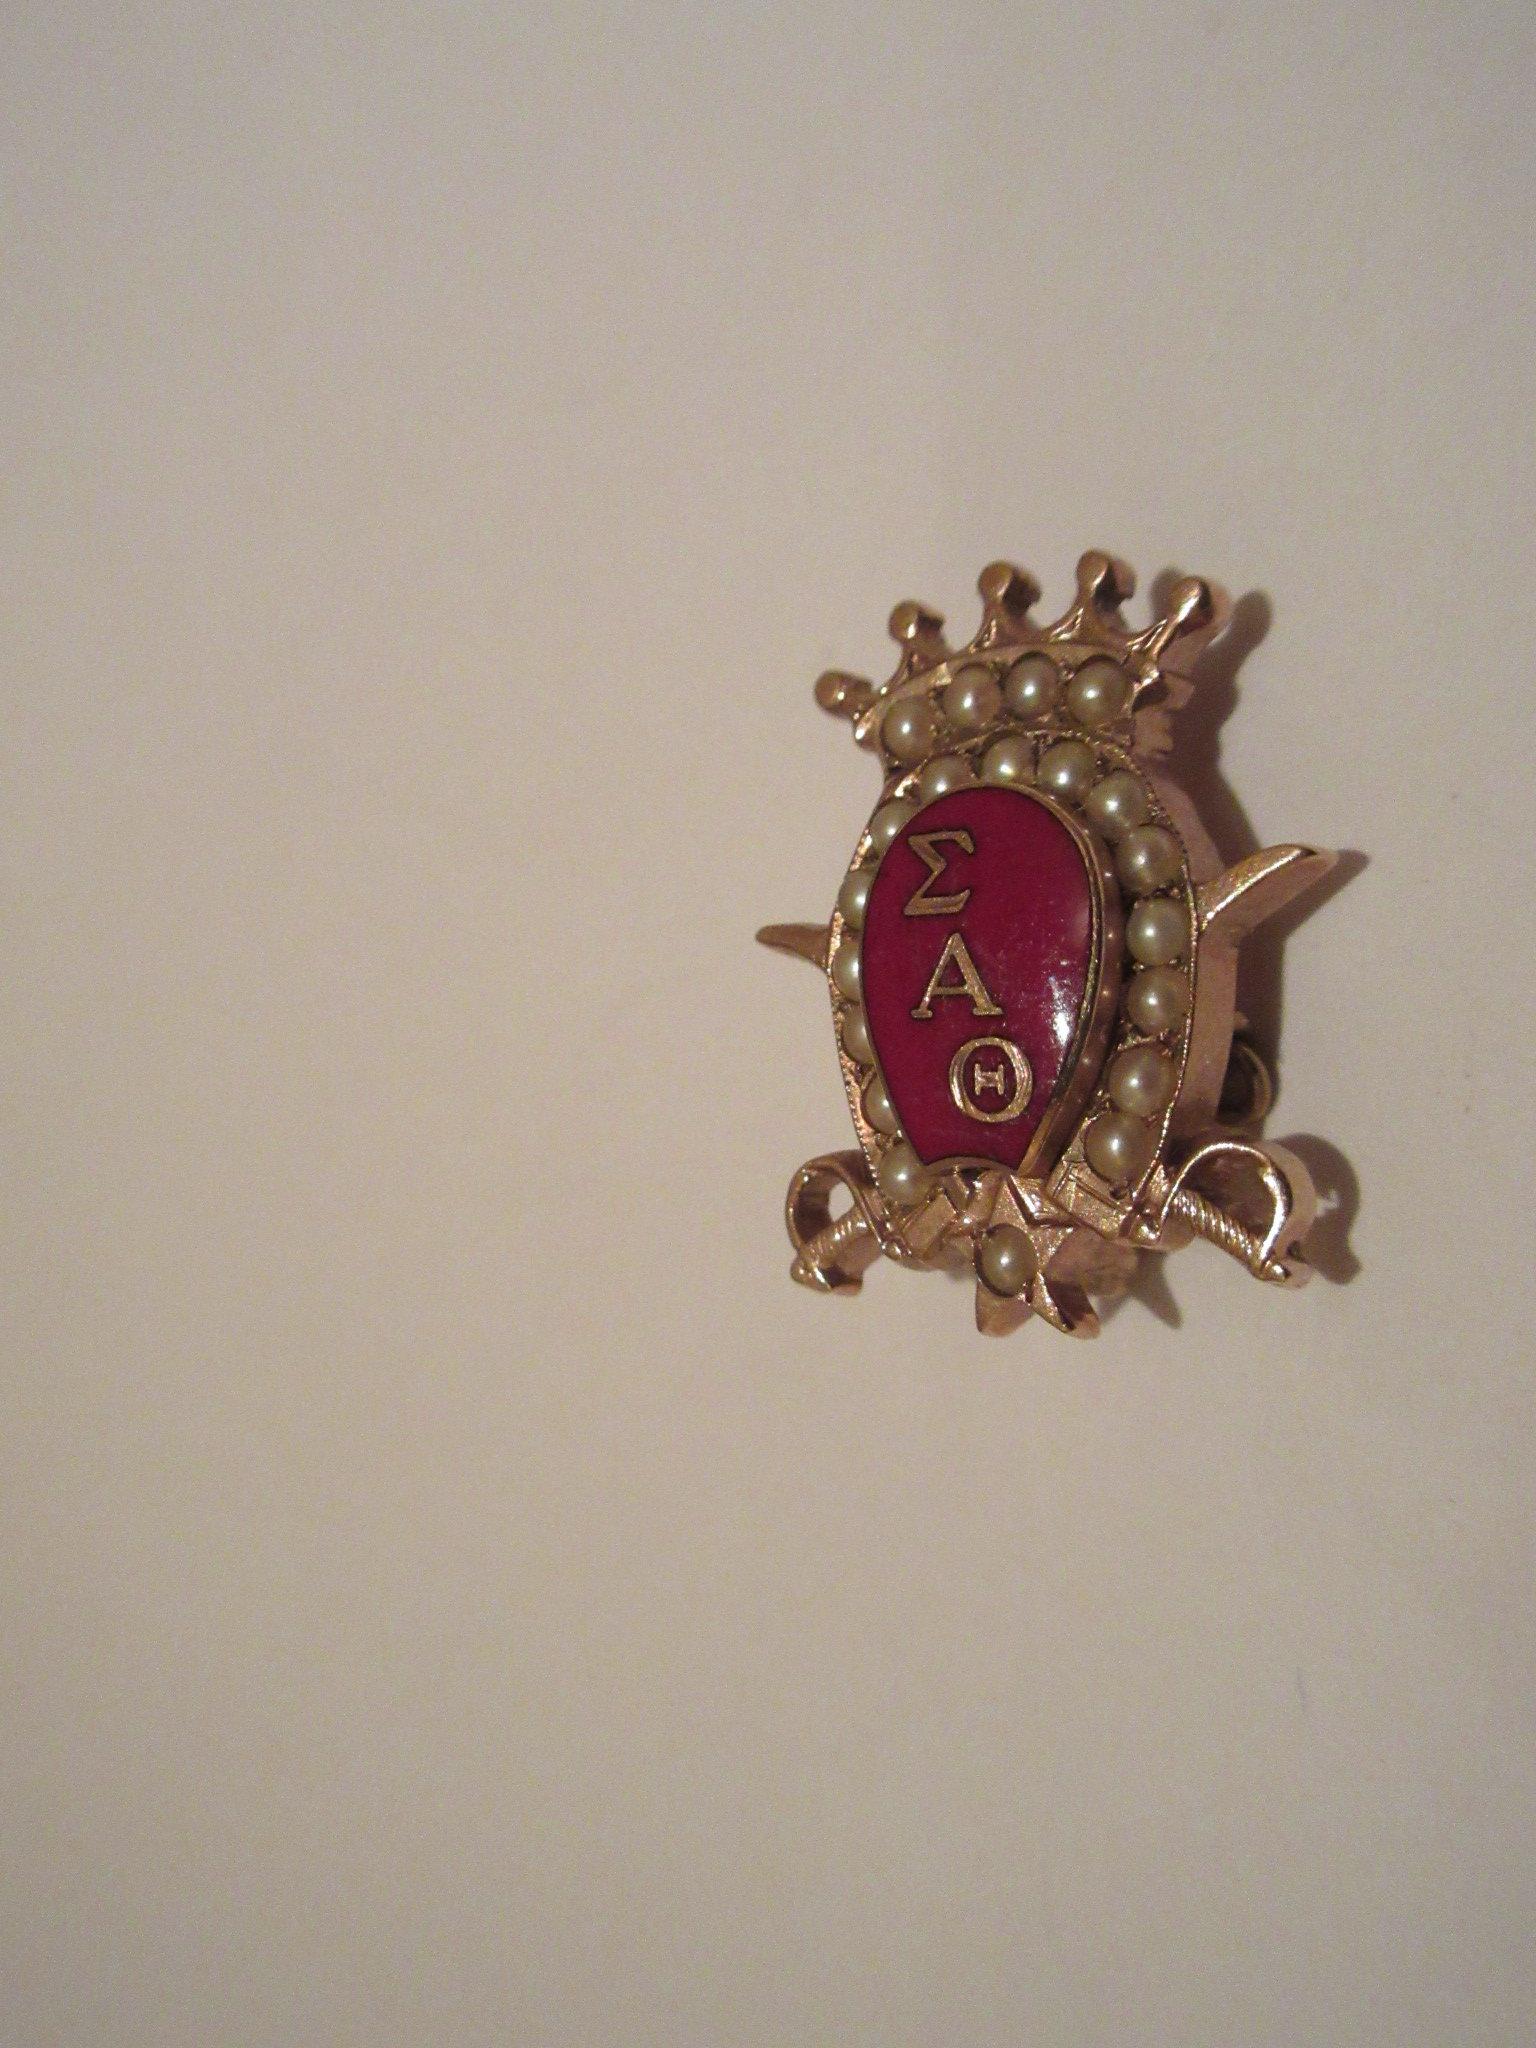 10K Yellow Gold Fraternity Pin/Brooch